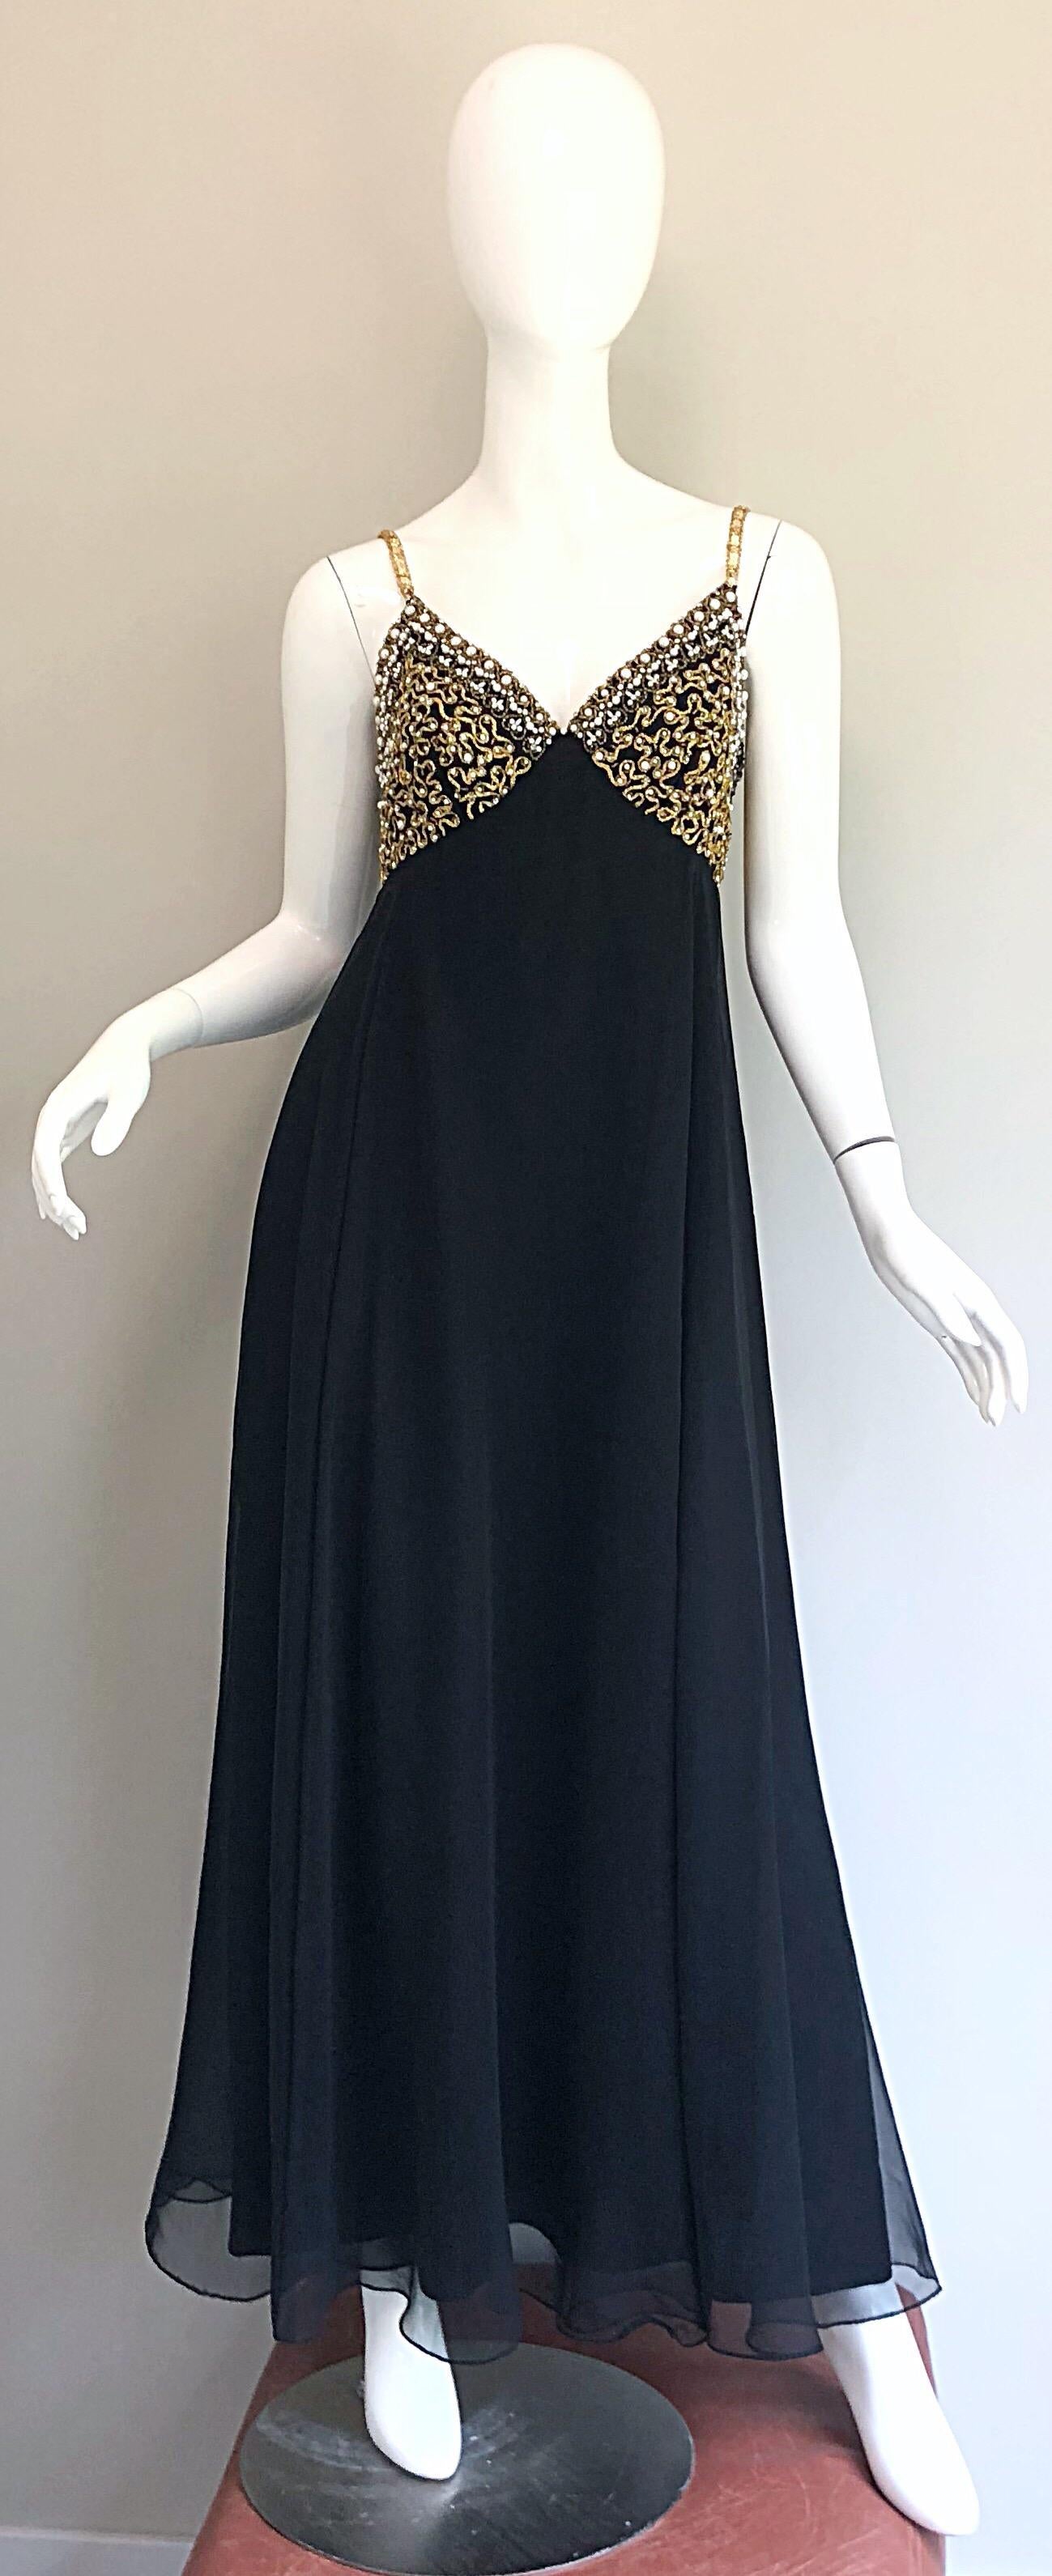 Gorgeous vintage 70s black and gold chiffon evening gown! Features a fitted bodice with spaghetti straps encrusted with gold sequins on each strap. Hundreds of hand-sewn pearls, sequins, rhinestones and beads on the front and back of the bodice.